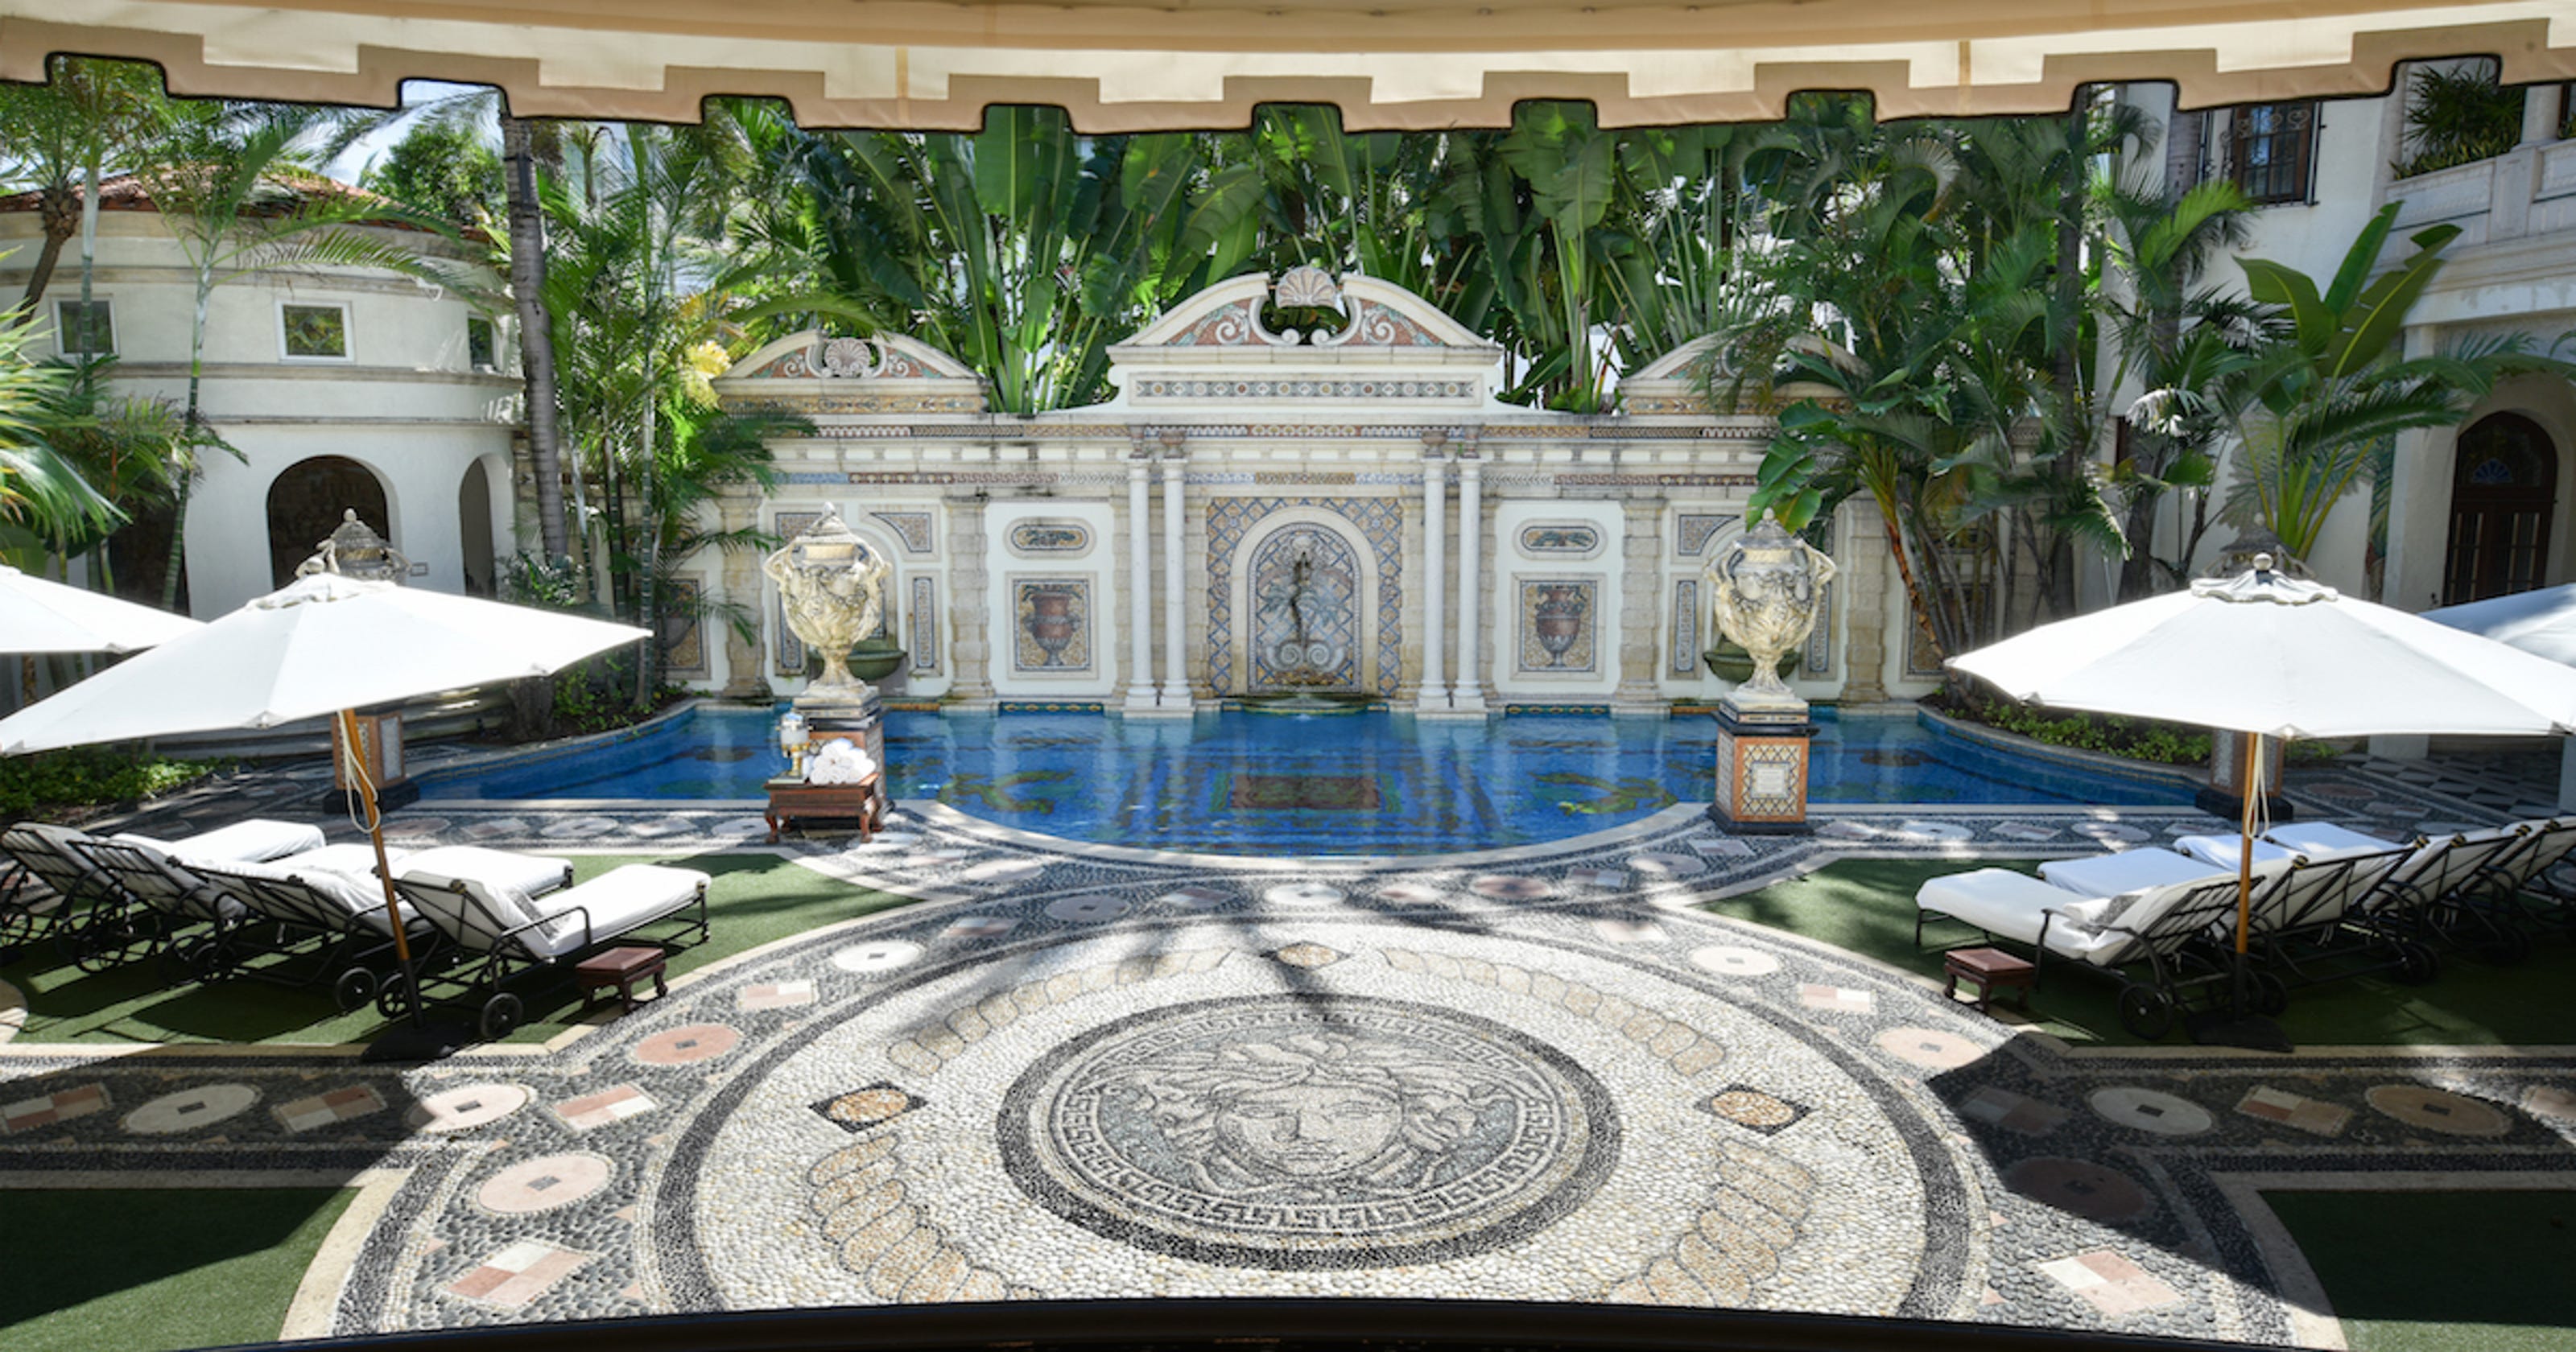 The Gianni Versace mansion is now a hotel. Here's a look inside